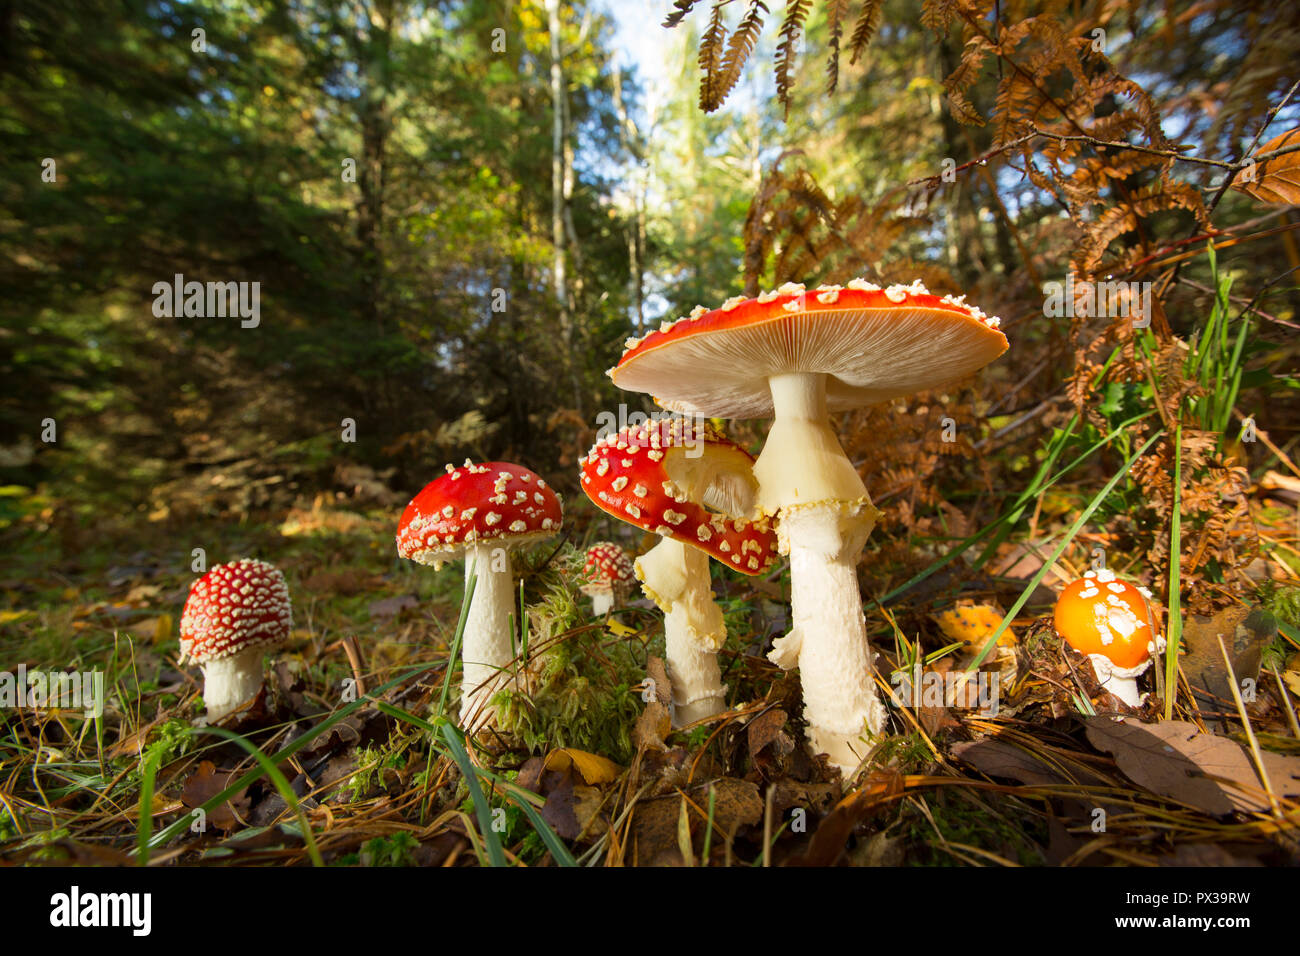 Fly agaric toadstools, Amanita muscaria, growing in woodlands in the New Forest Hampshire England UK GB Stock Photo